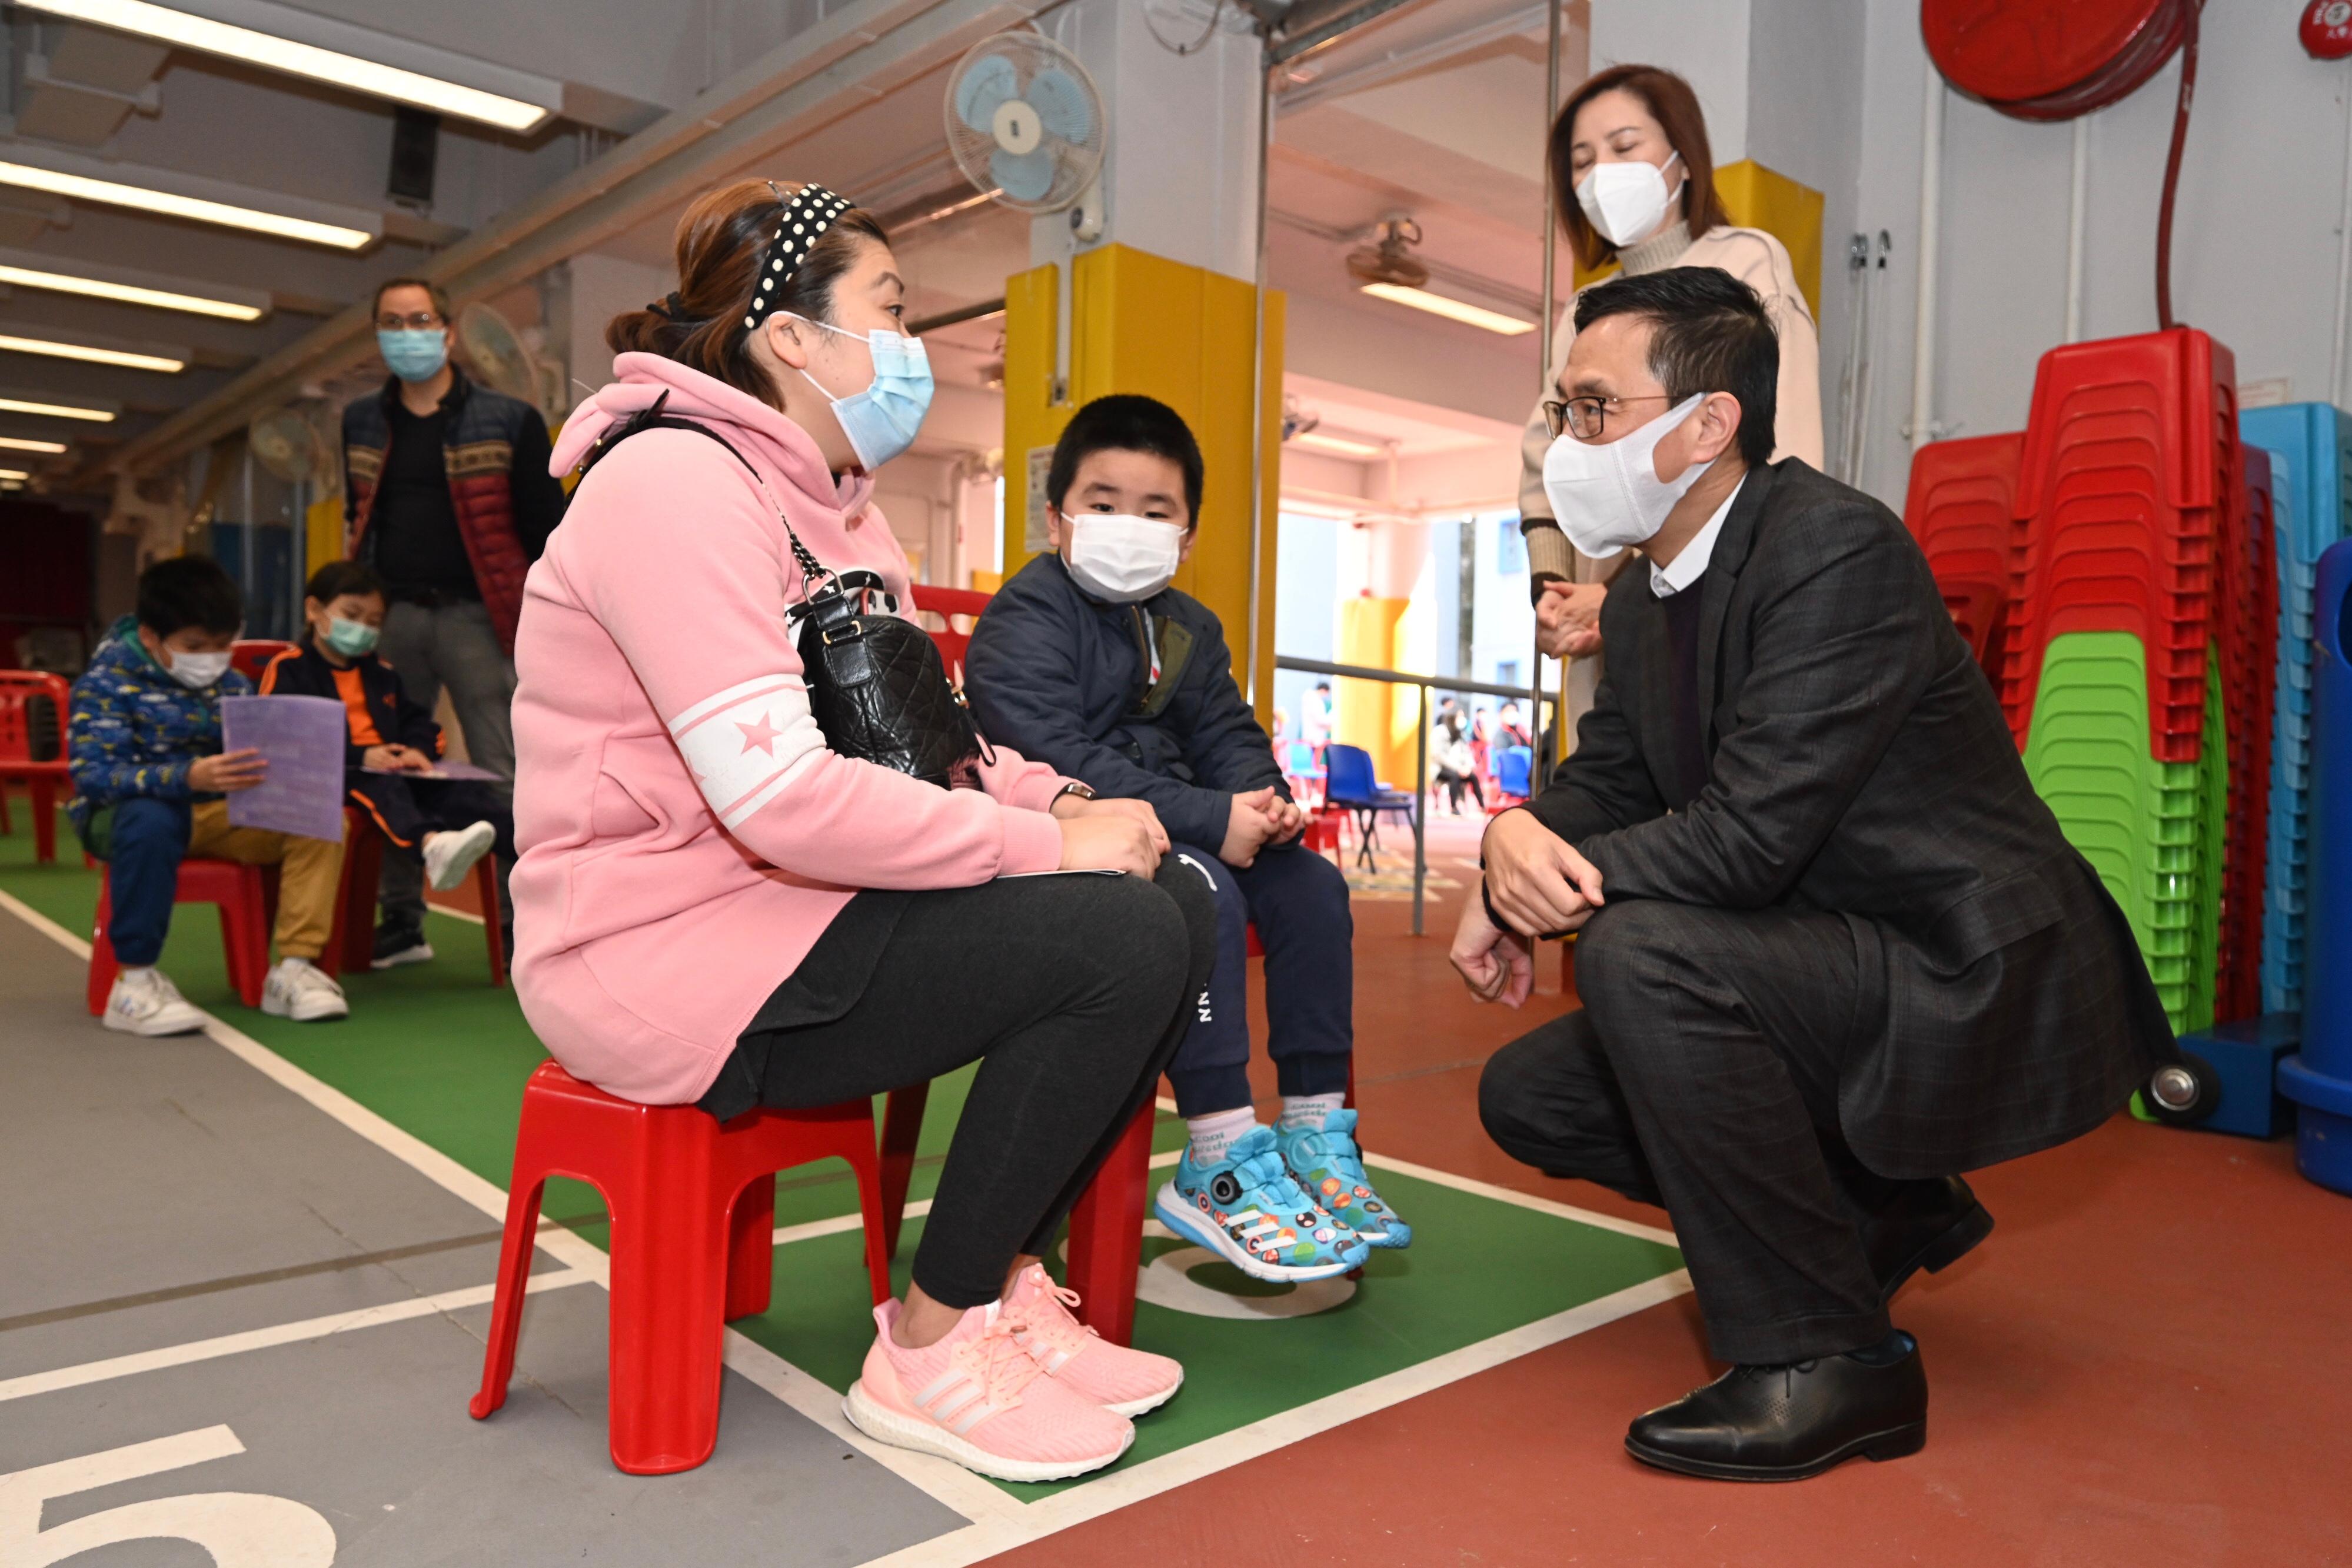 The Secretary for Education, Mr Kevin Yeung, visited Shau Kei Wan Government Primary School today (February 25) to inspect the implementation of the Vaccination Subsidy Scheme School Outreach. Picture shows Mr Yeung talking to a parent and a student.